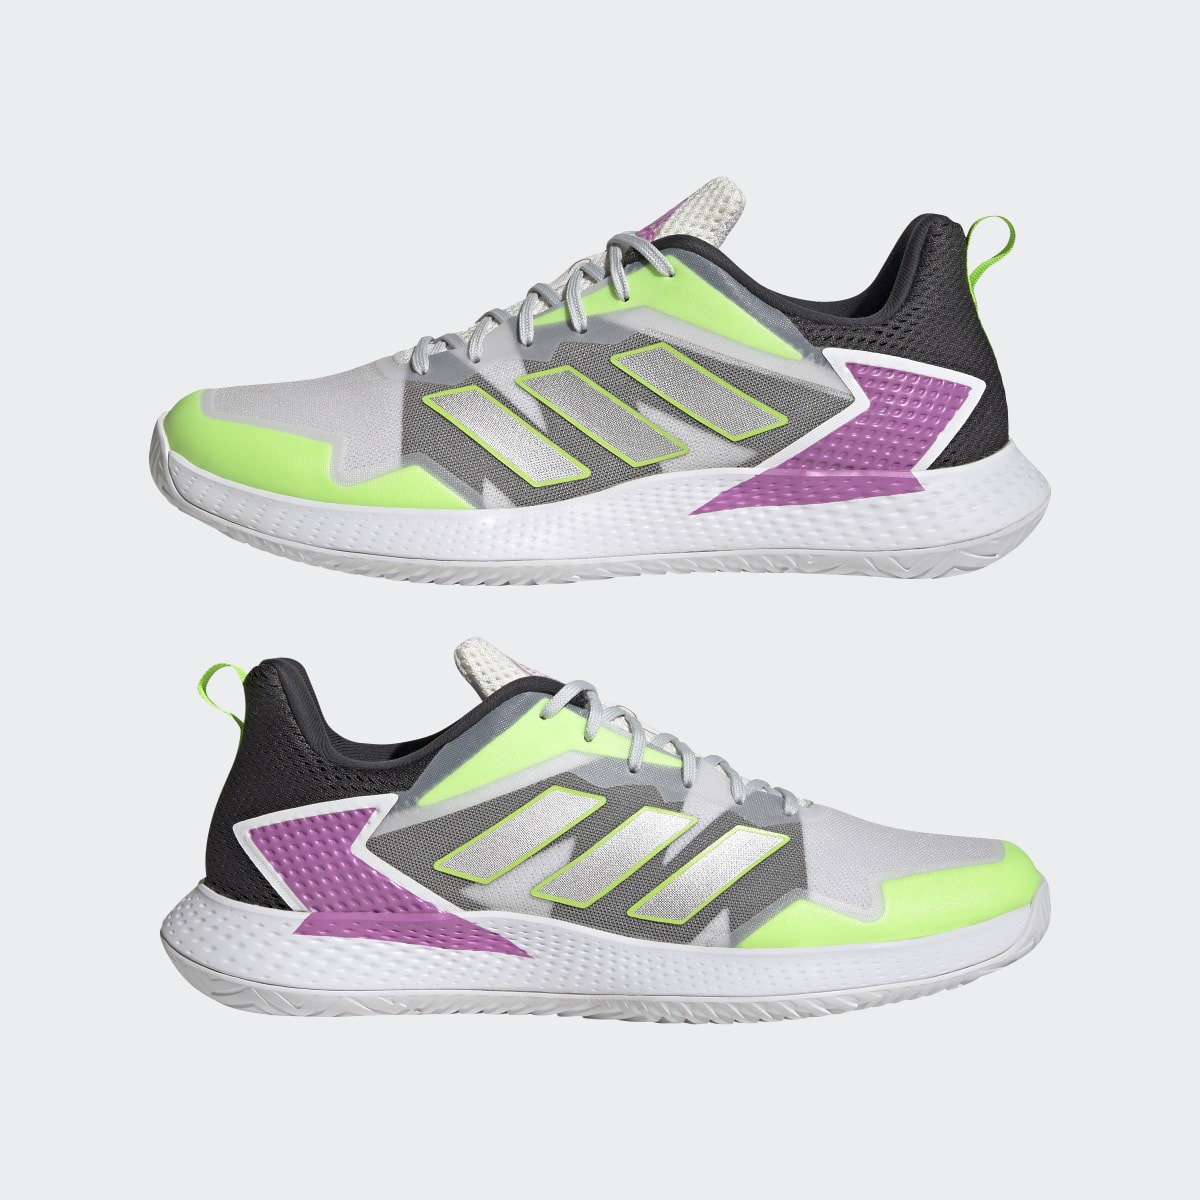 Adidas Defiant Speed Tennis Shoes. 8